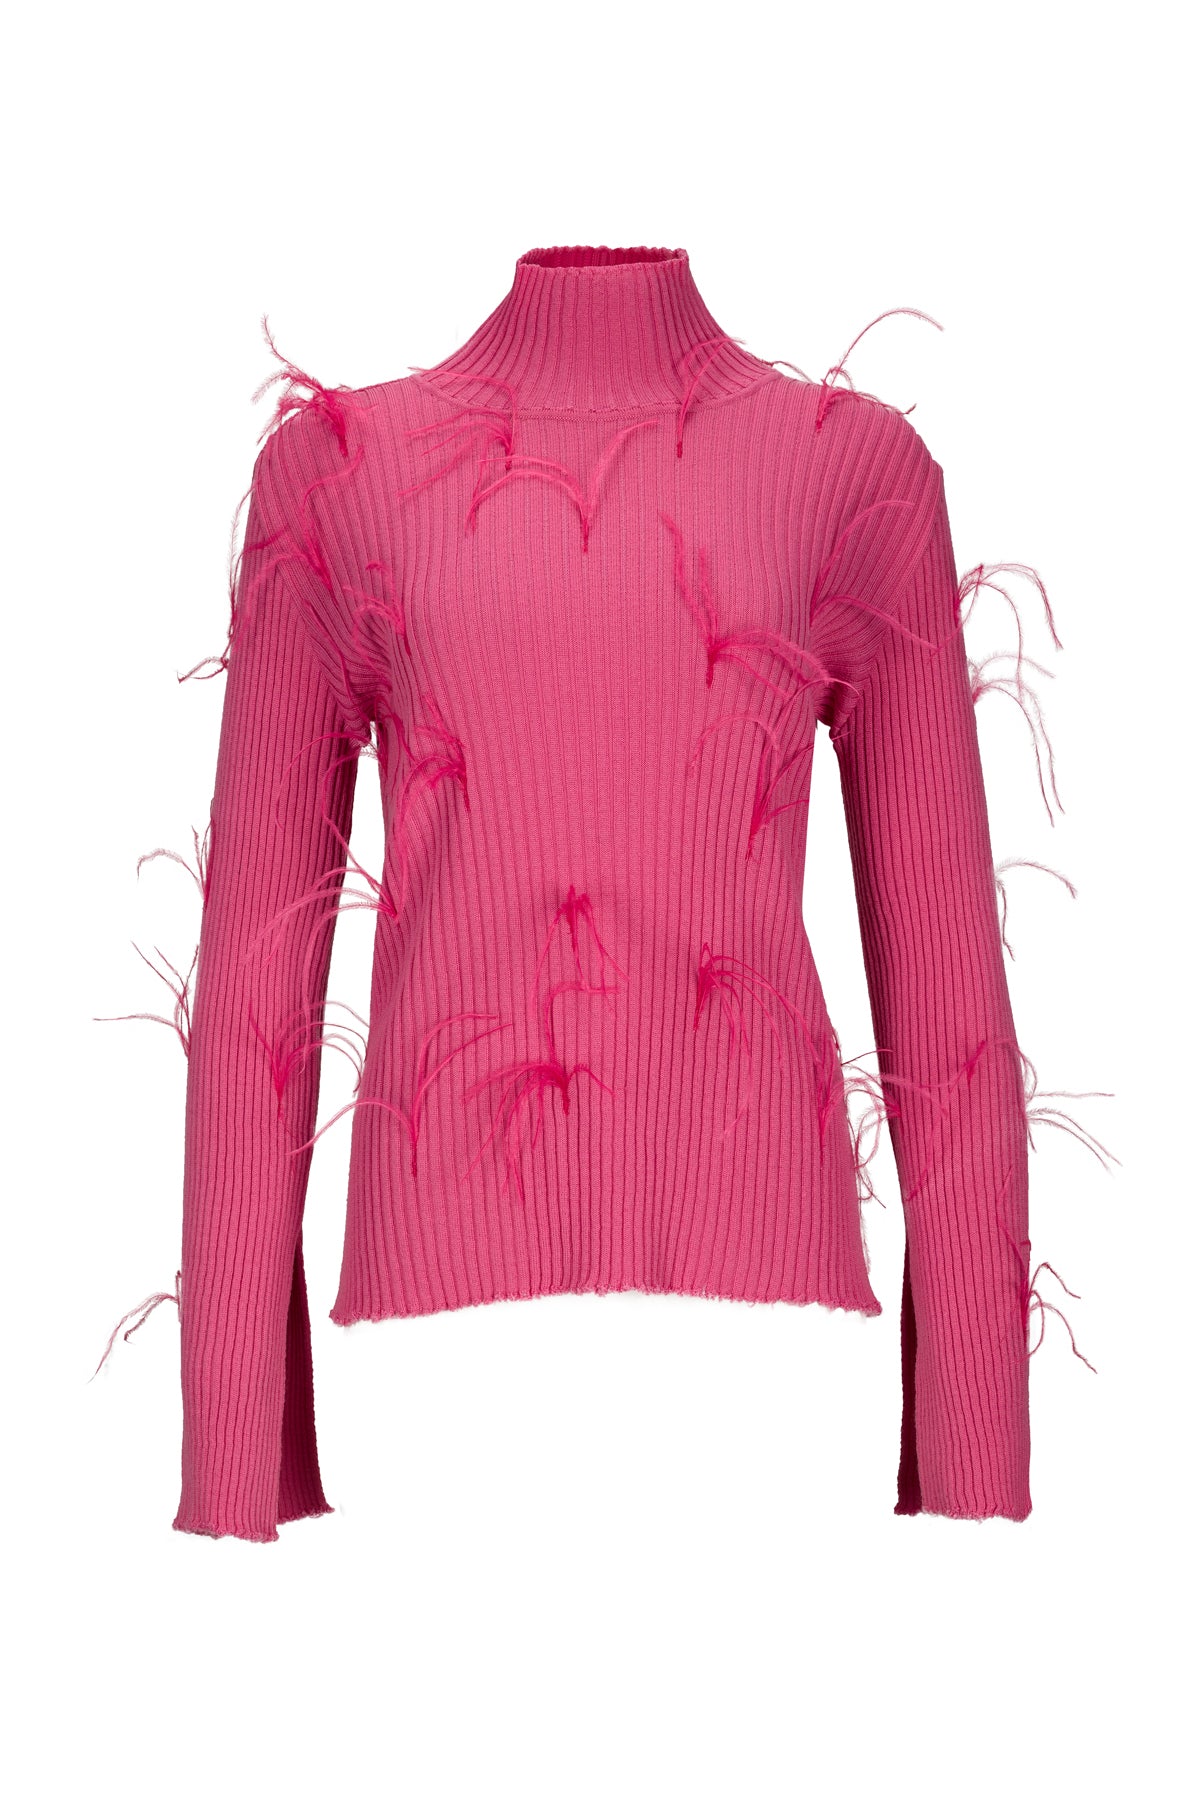 PINK MERINO FITTED FEATHER TURTLENECK marques almeidaPINK MERINO FITTED FEATHER TURTLENECK marques almeida